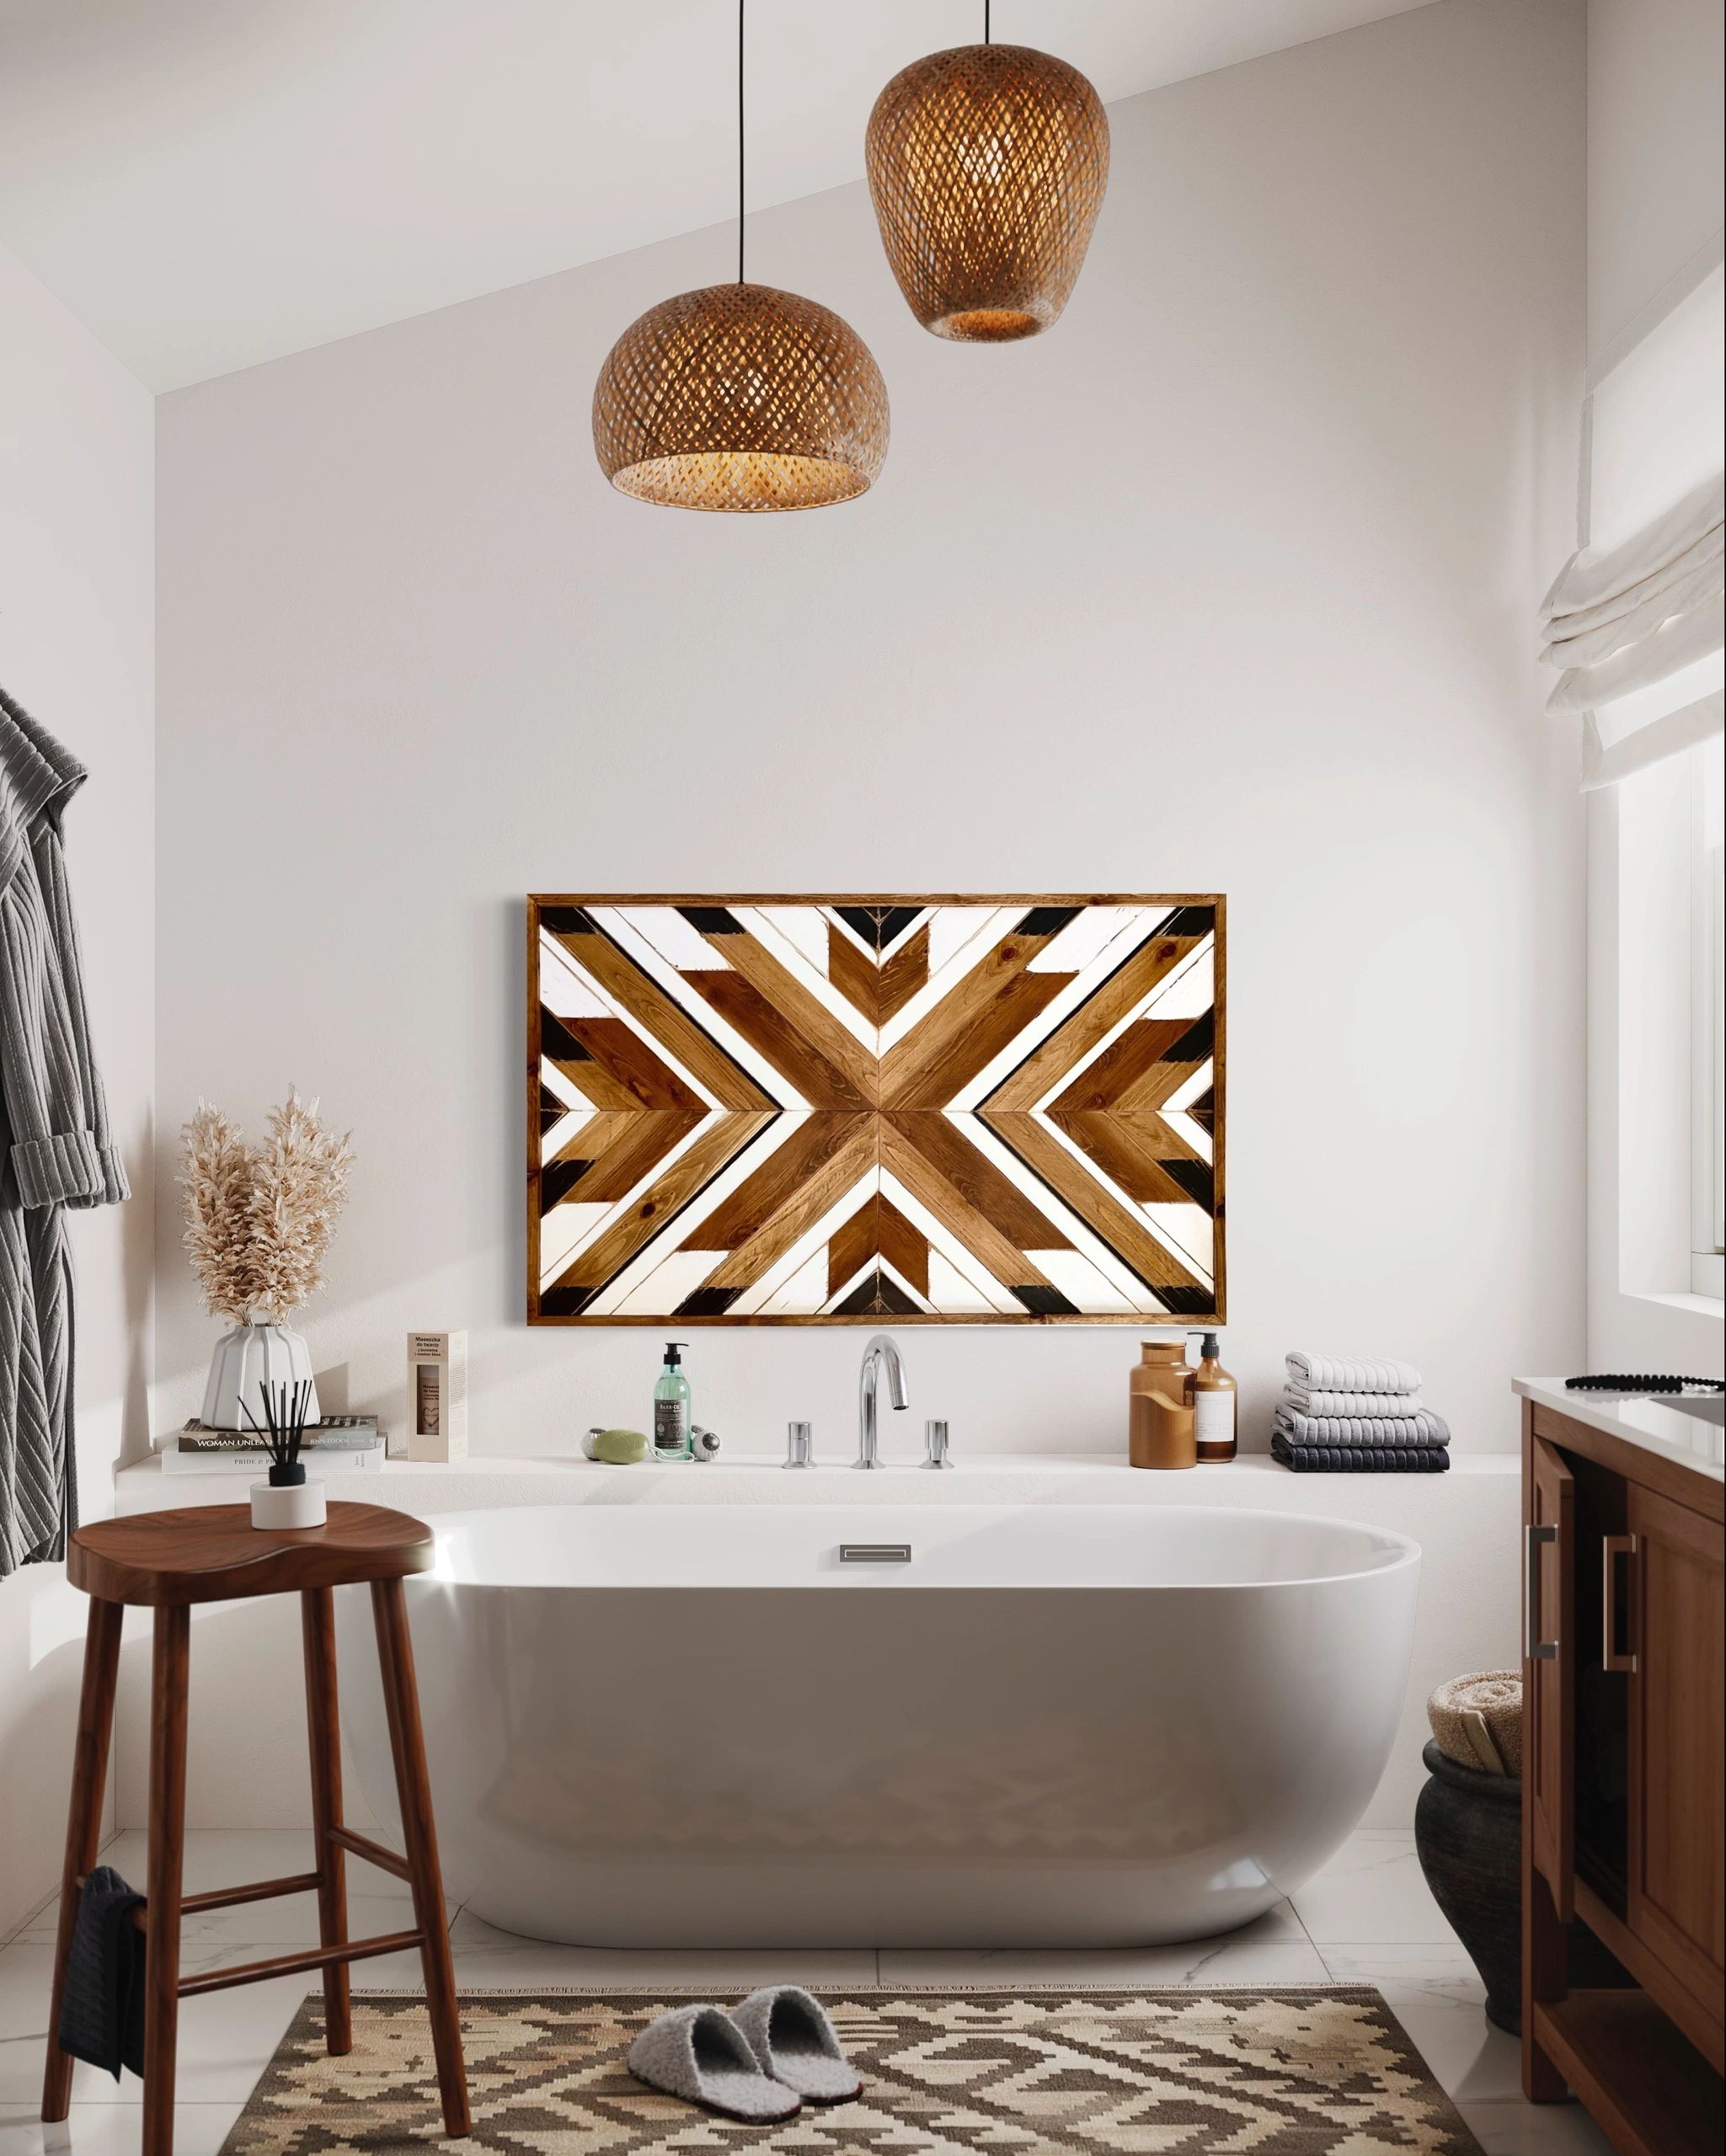 Geometric wood wall art in a modern bathroom. Wood tones, black accents with a white background.